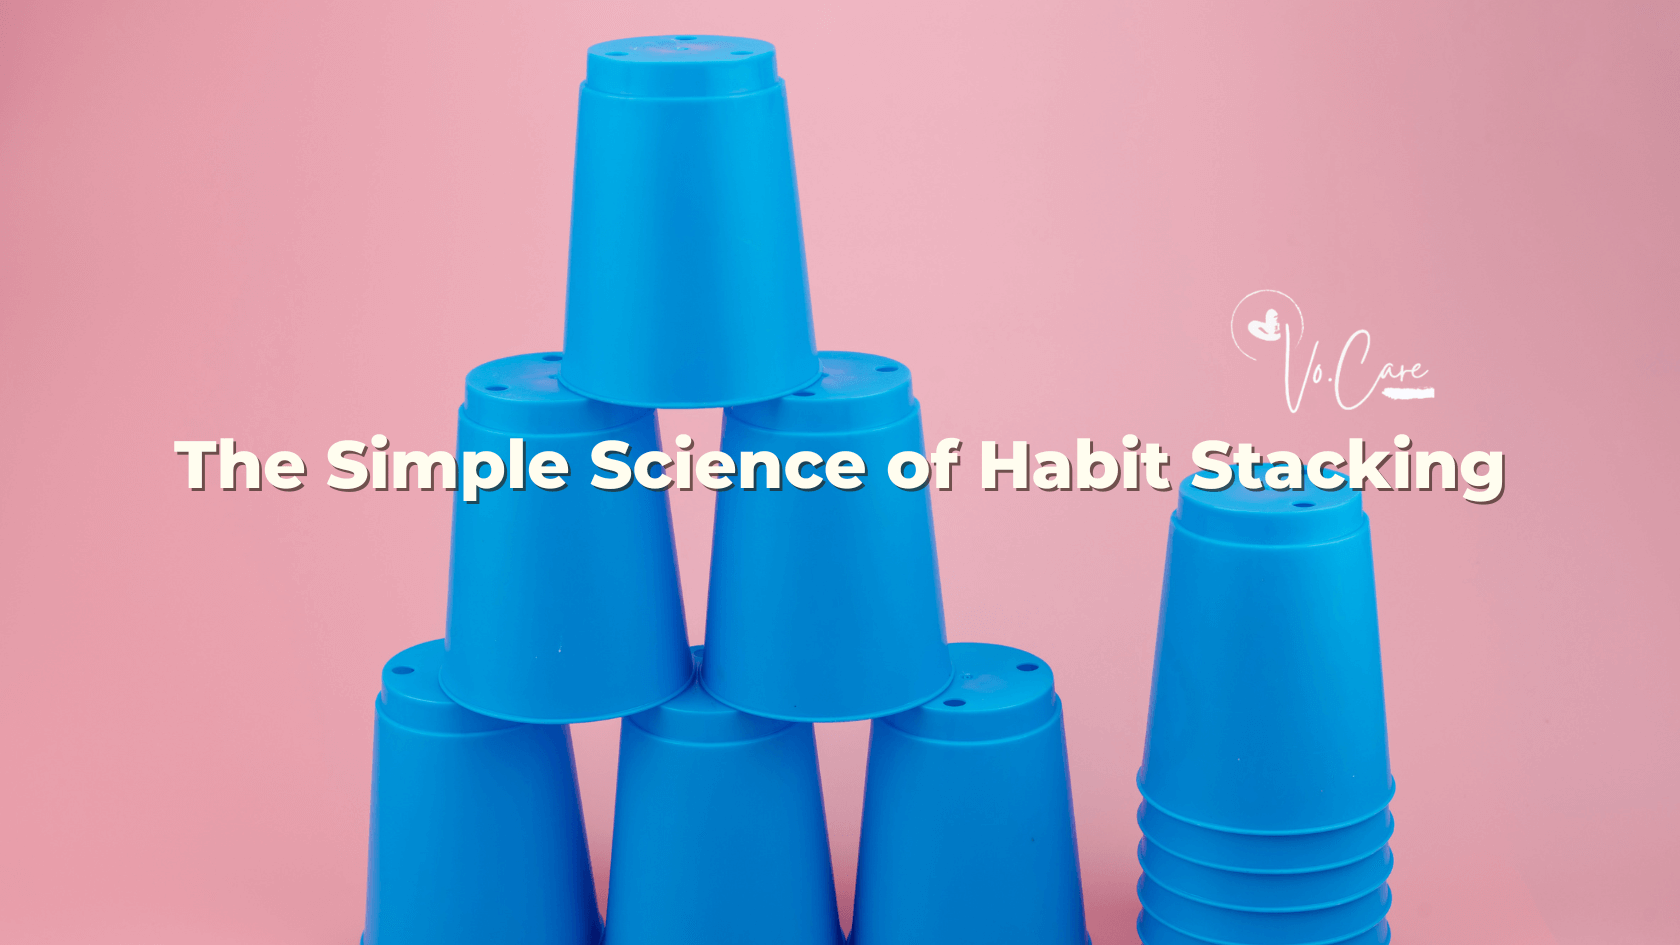 The Simple Science of Habit Stacking